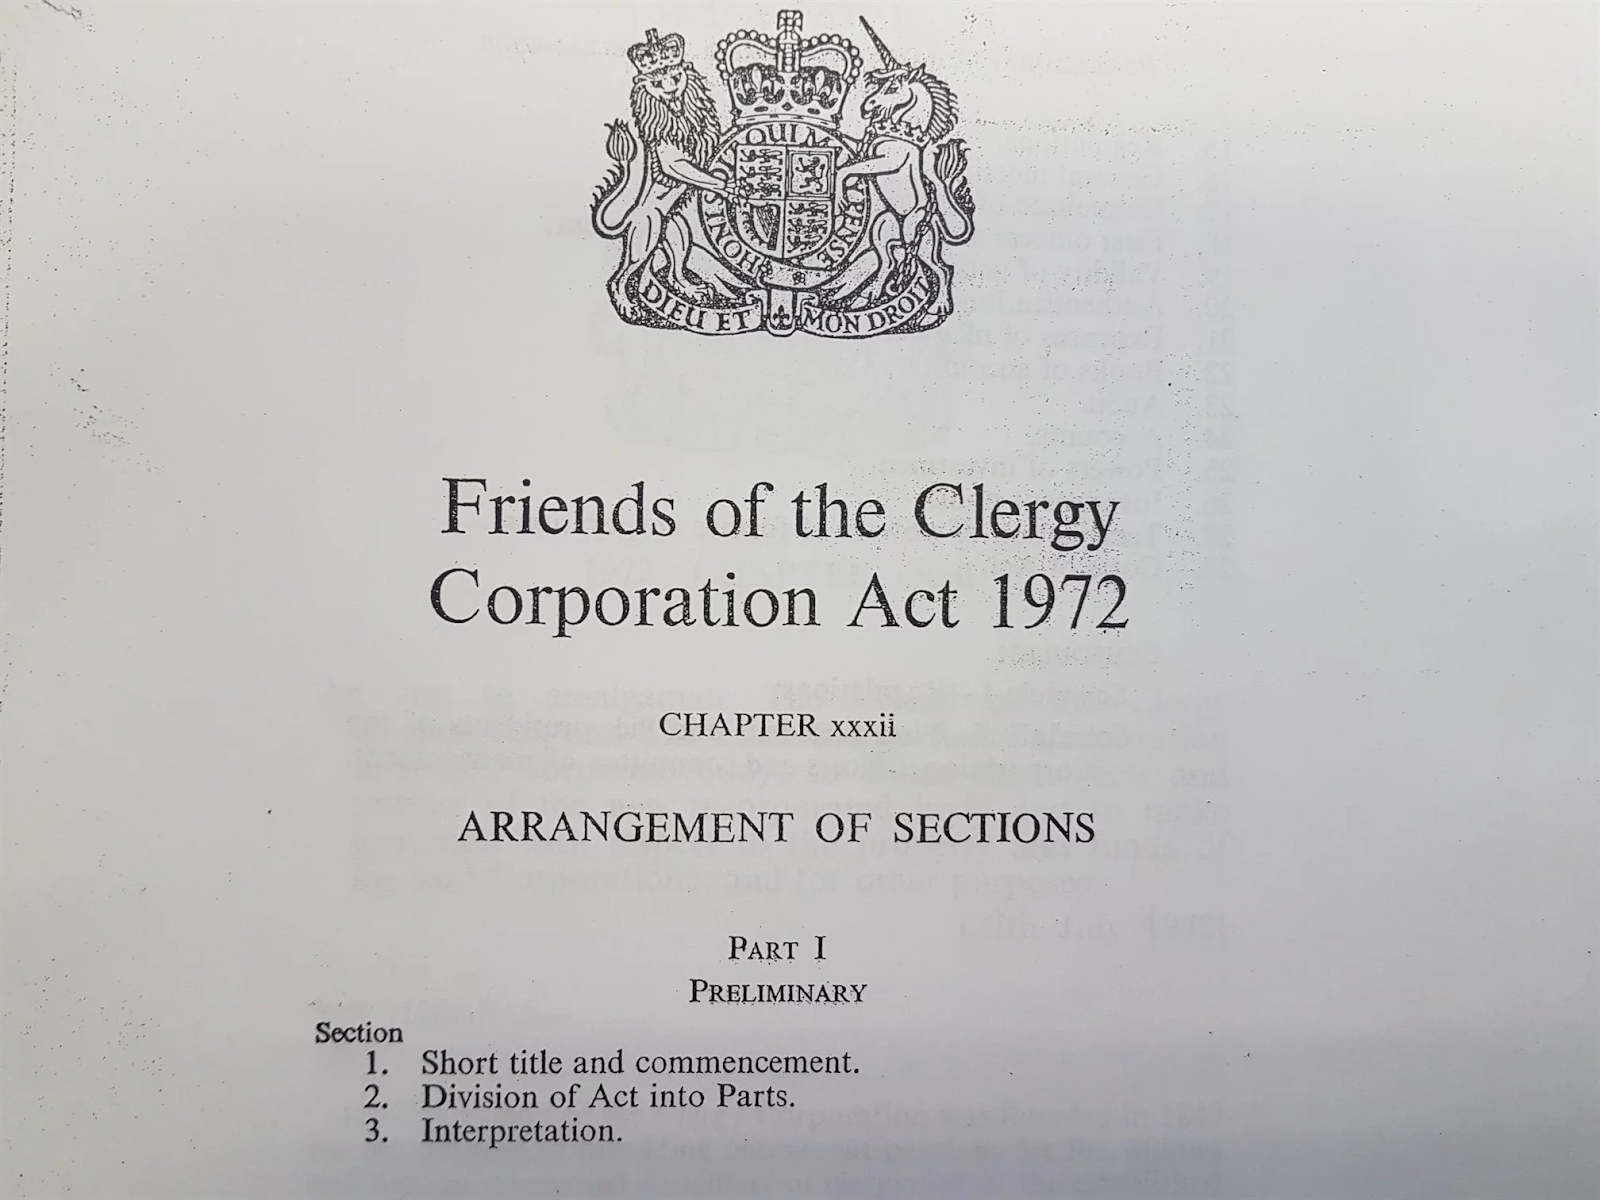 Friends of the Clergy Corporation Act 1972